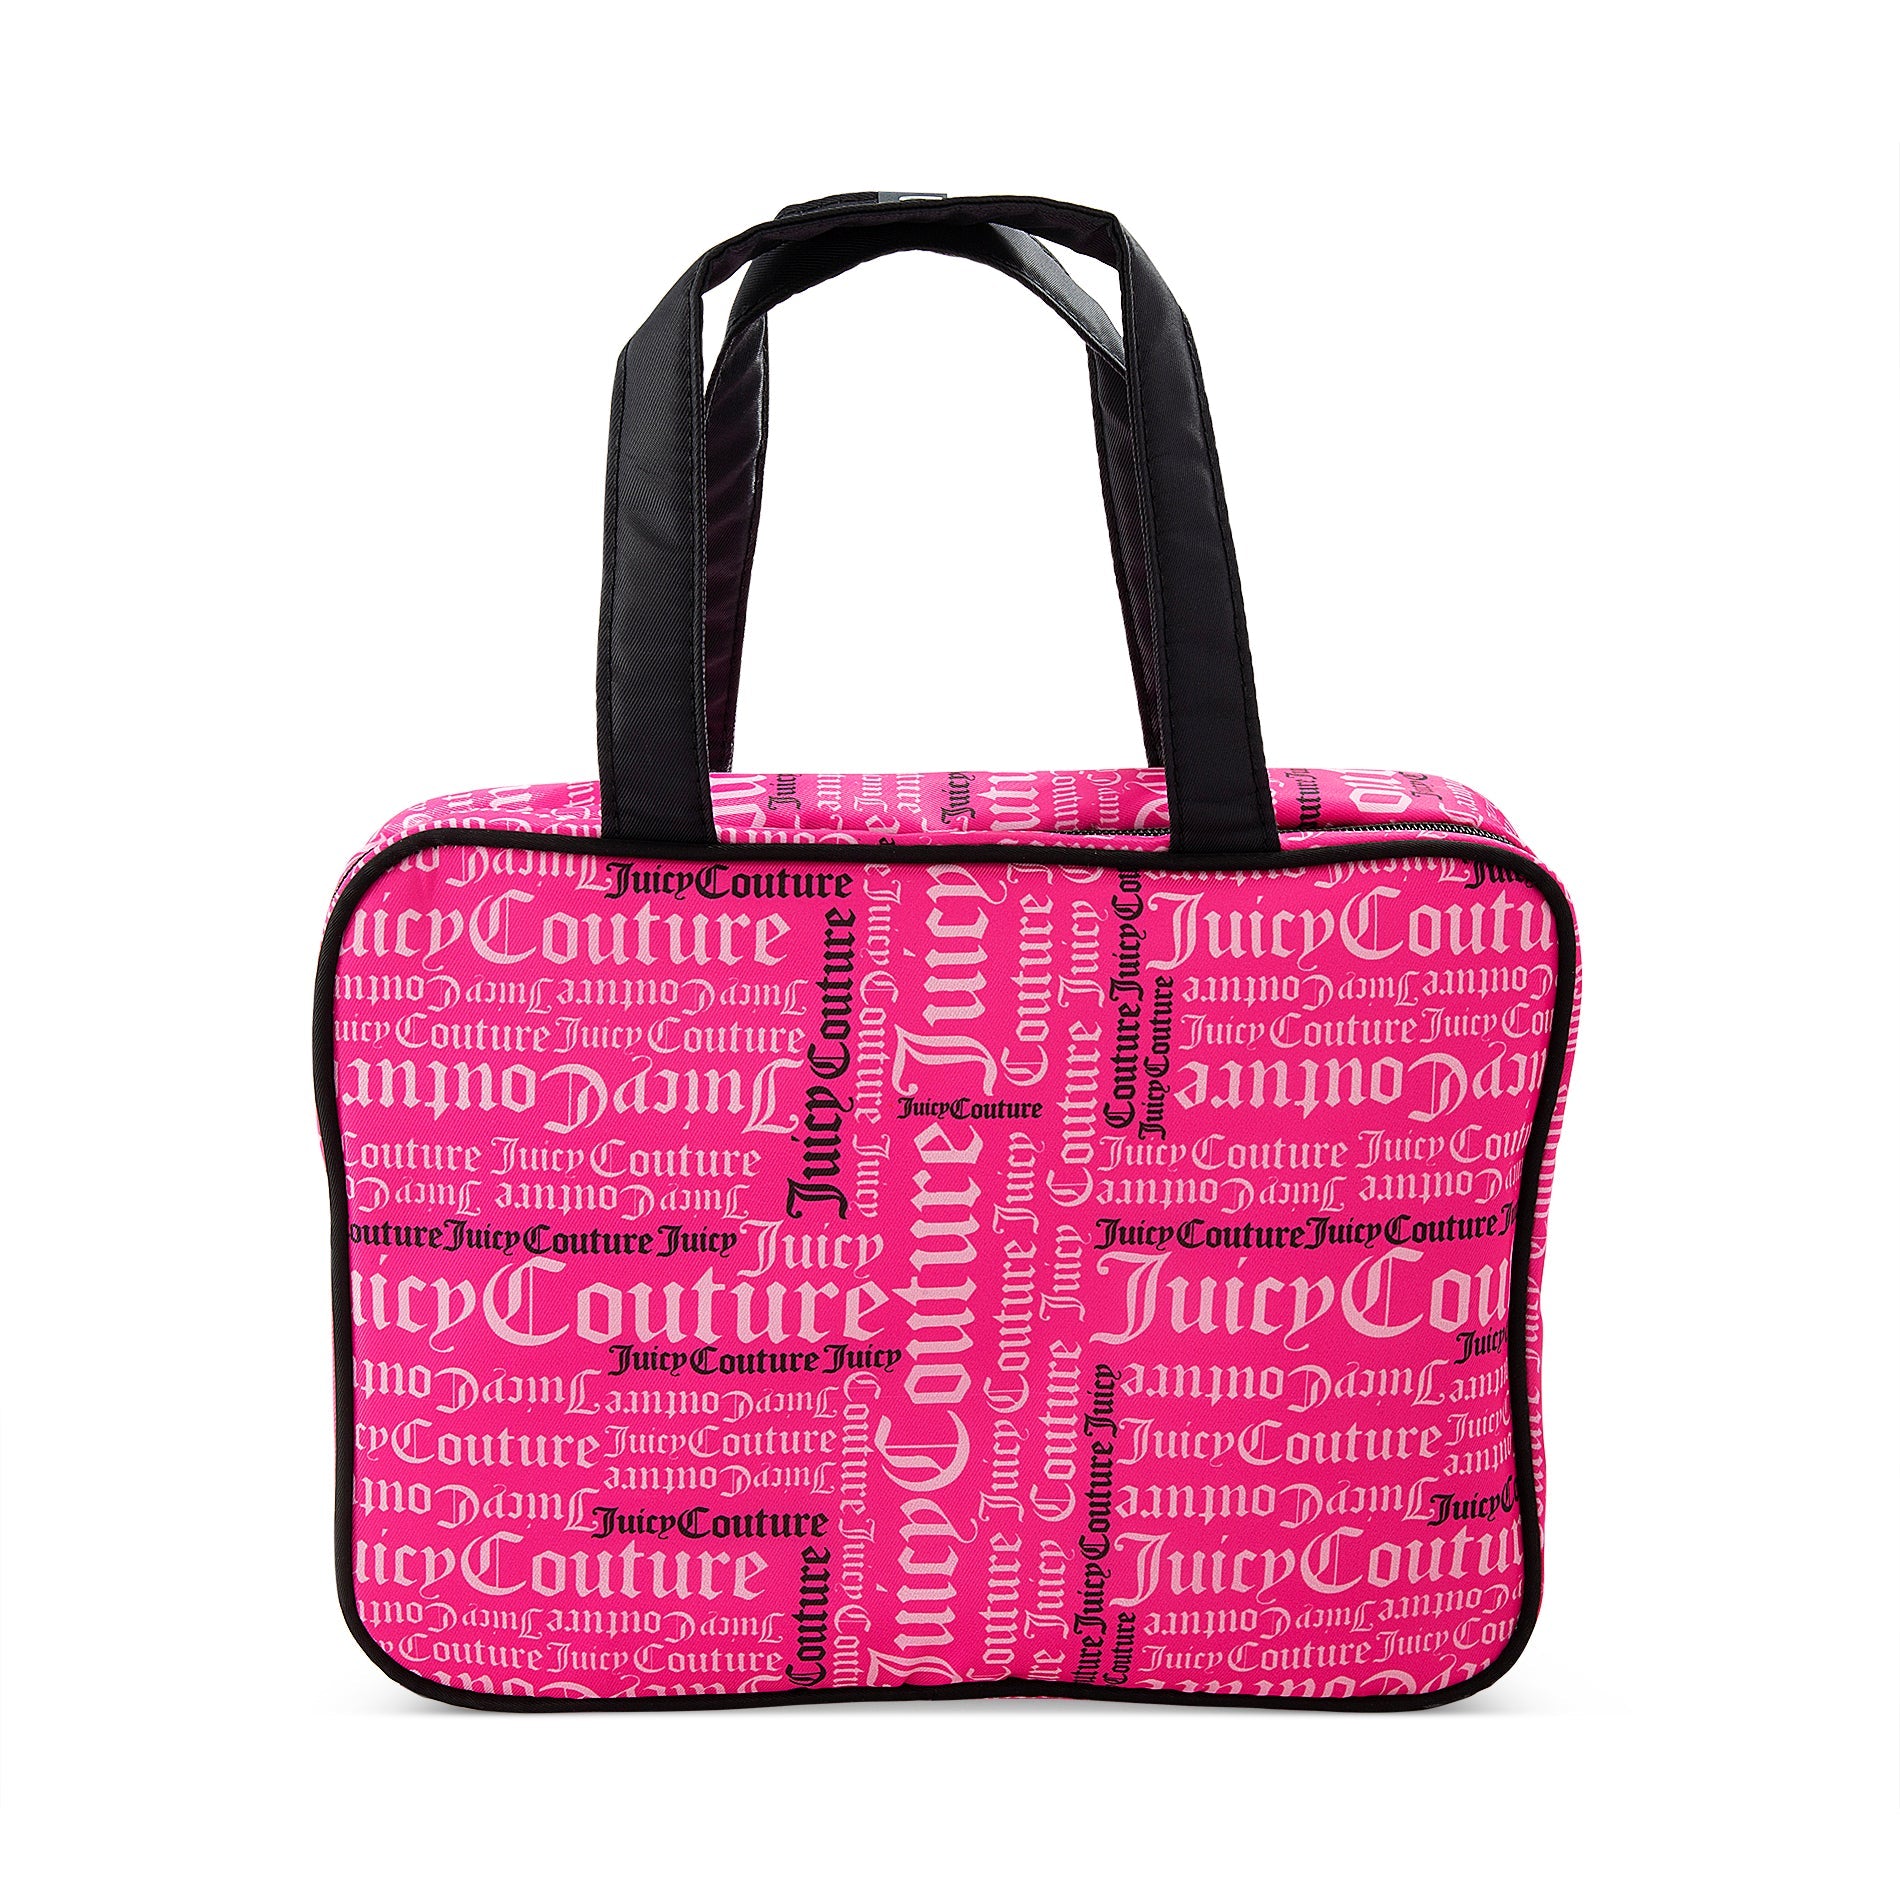 This is My Hoe Bag Pink Tote Glitter Vinyl Tote Bag Purse 